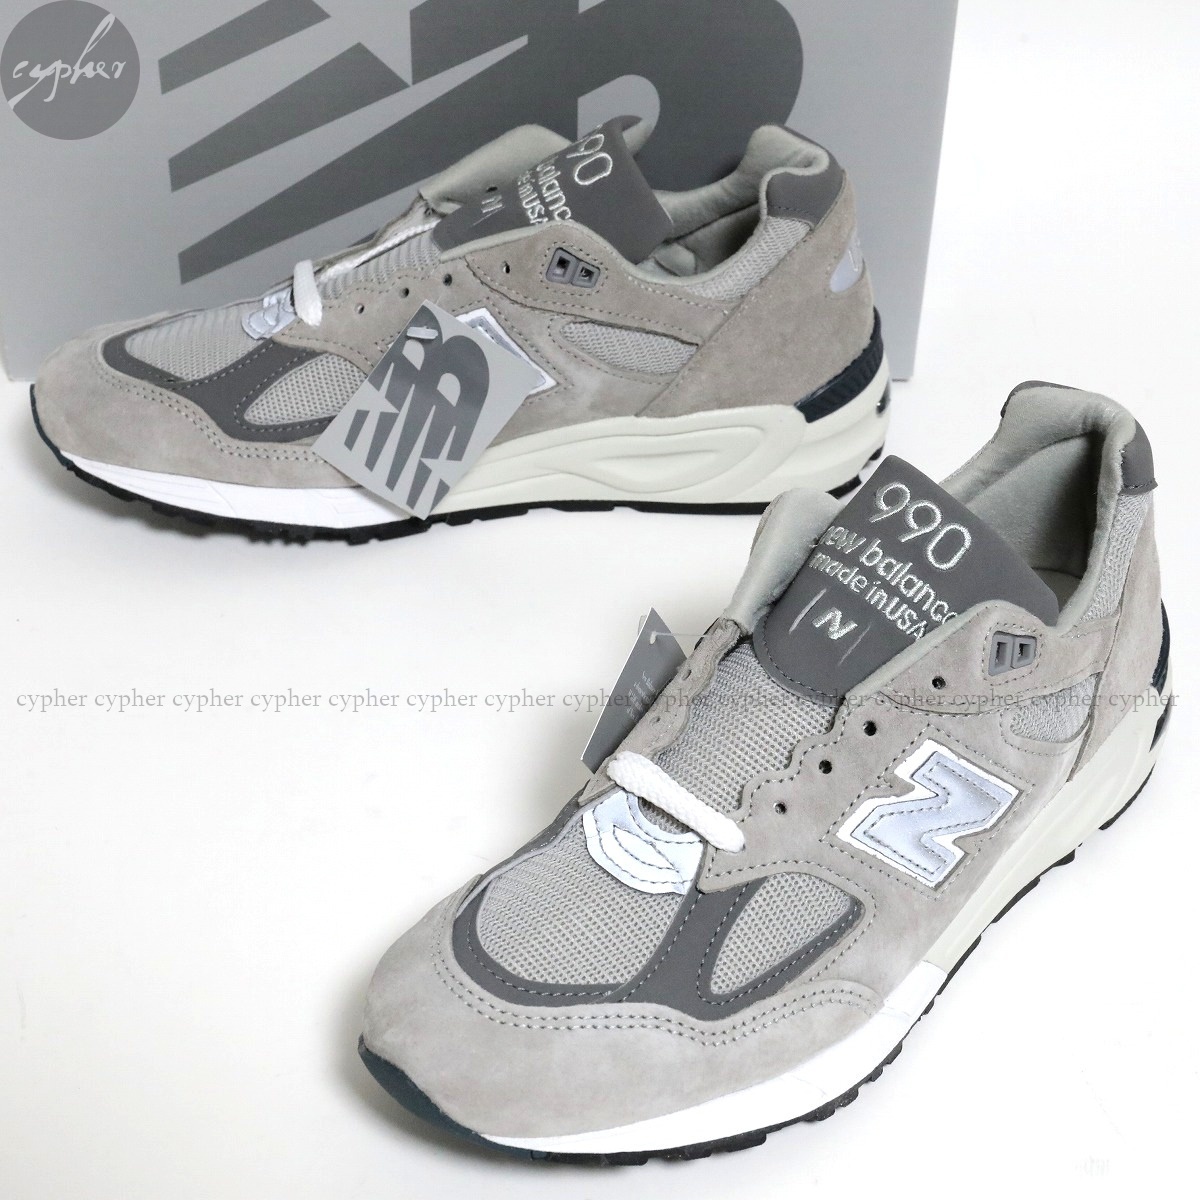 Search Results for "new balance 990 26.5" /【Buyee】 Buyee